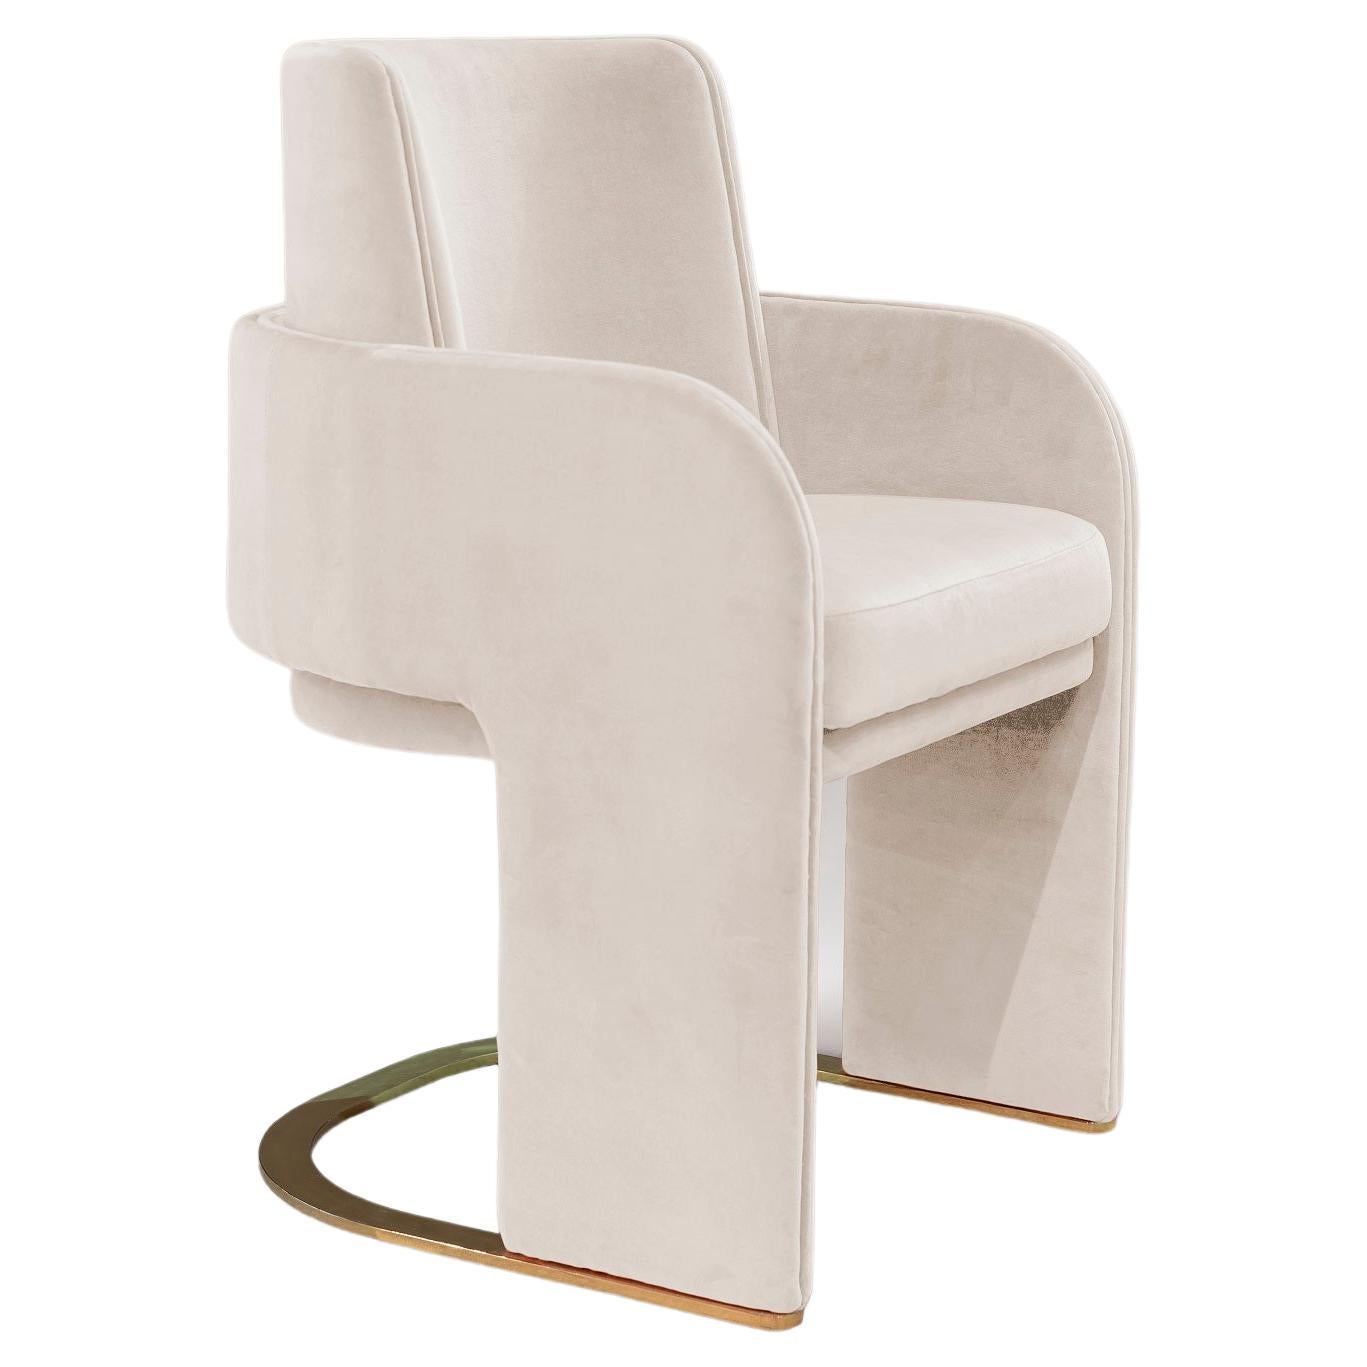 DOOQ Dining Chair Odisseia with Soft Light Cotton Velvet and Brass